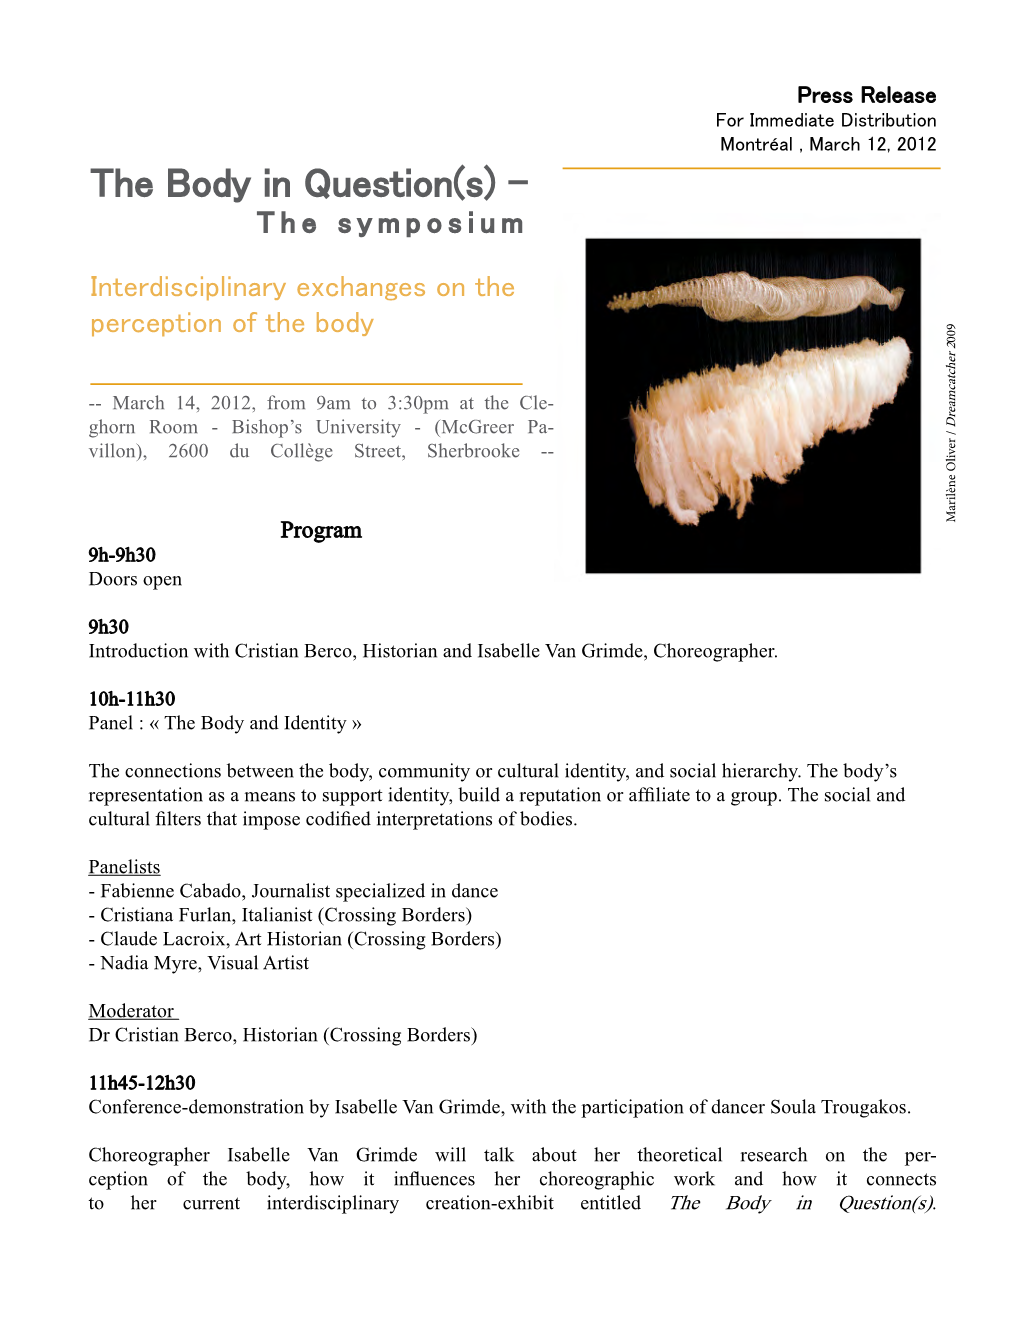 The Body in Question(S) - the Symposium